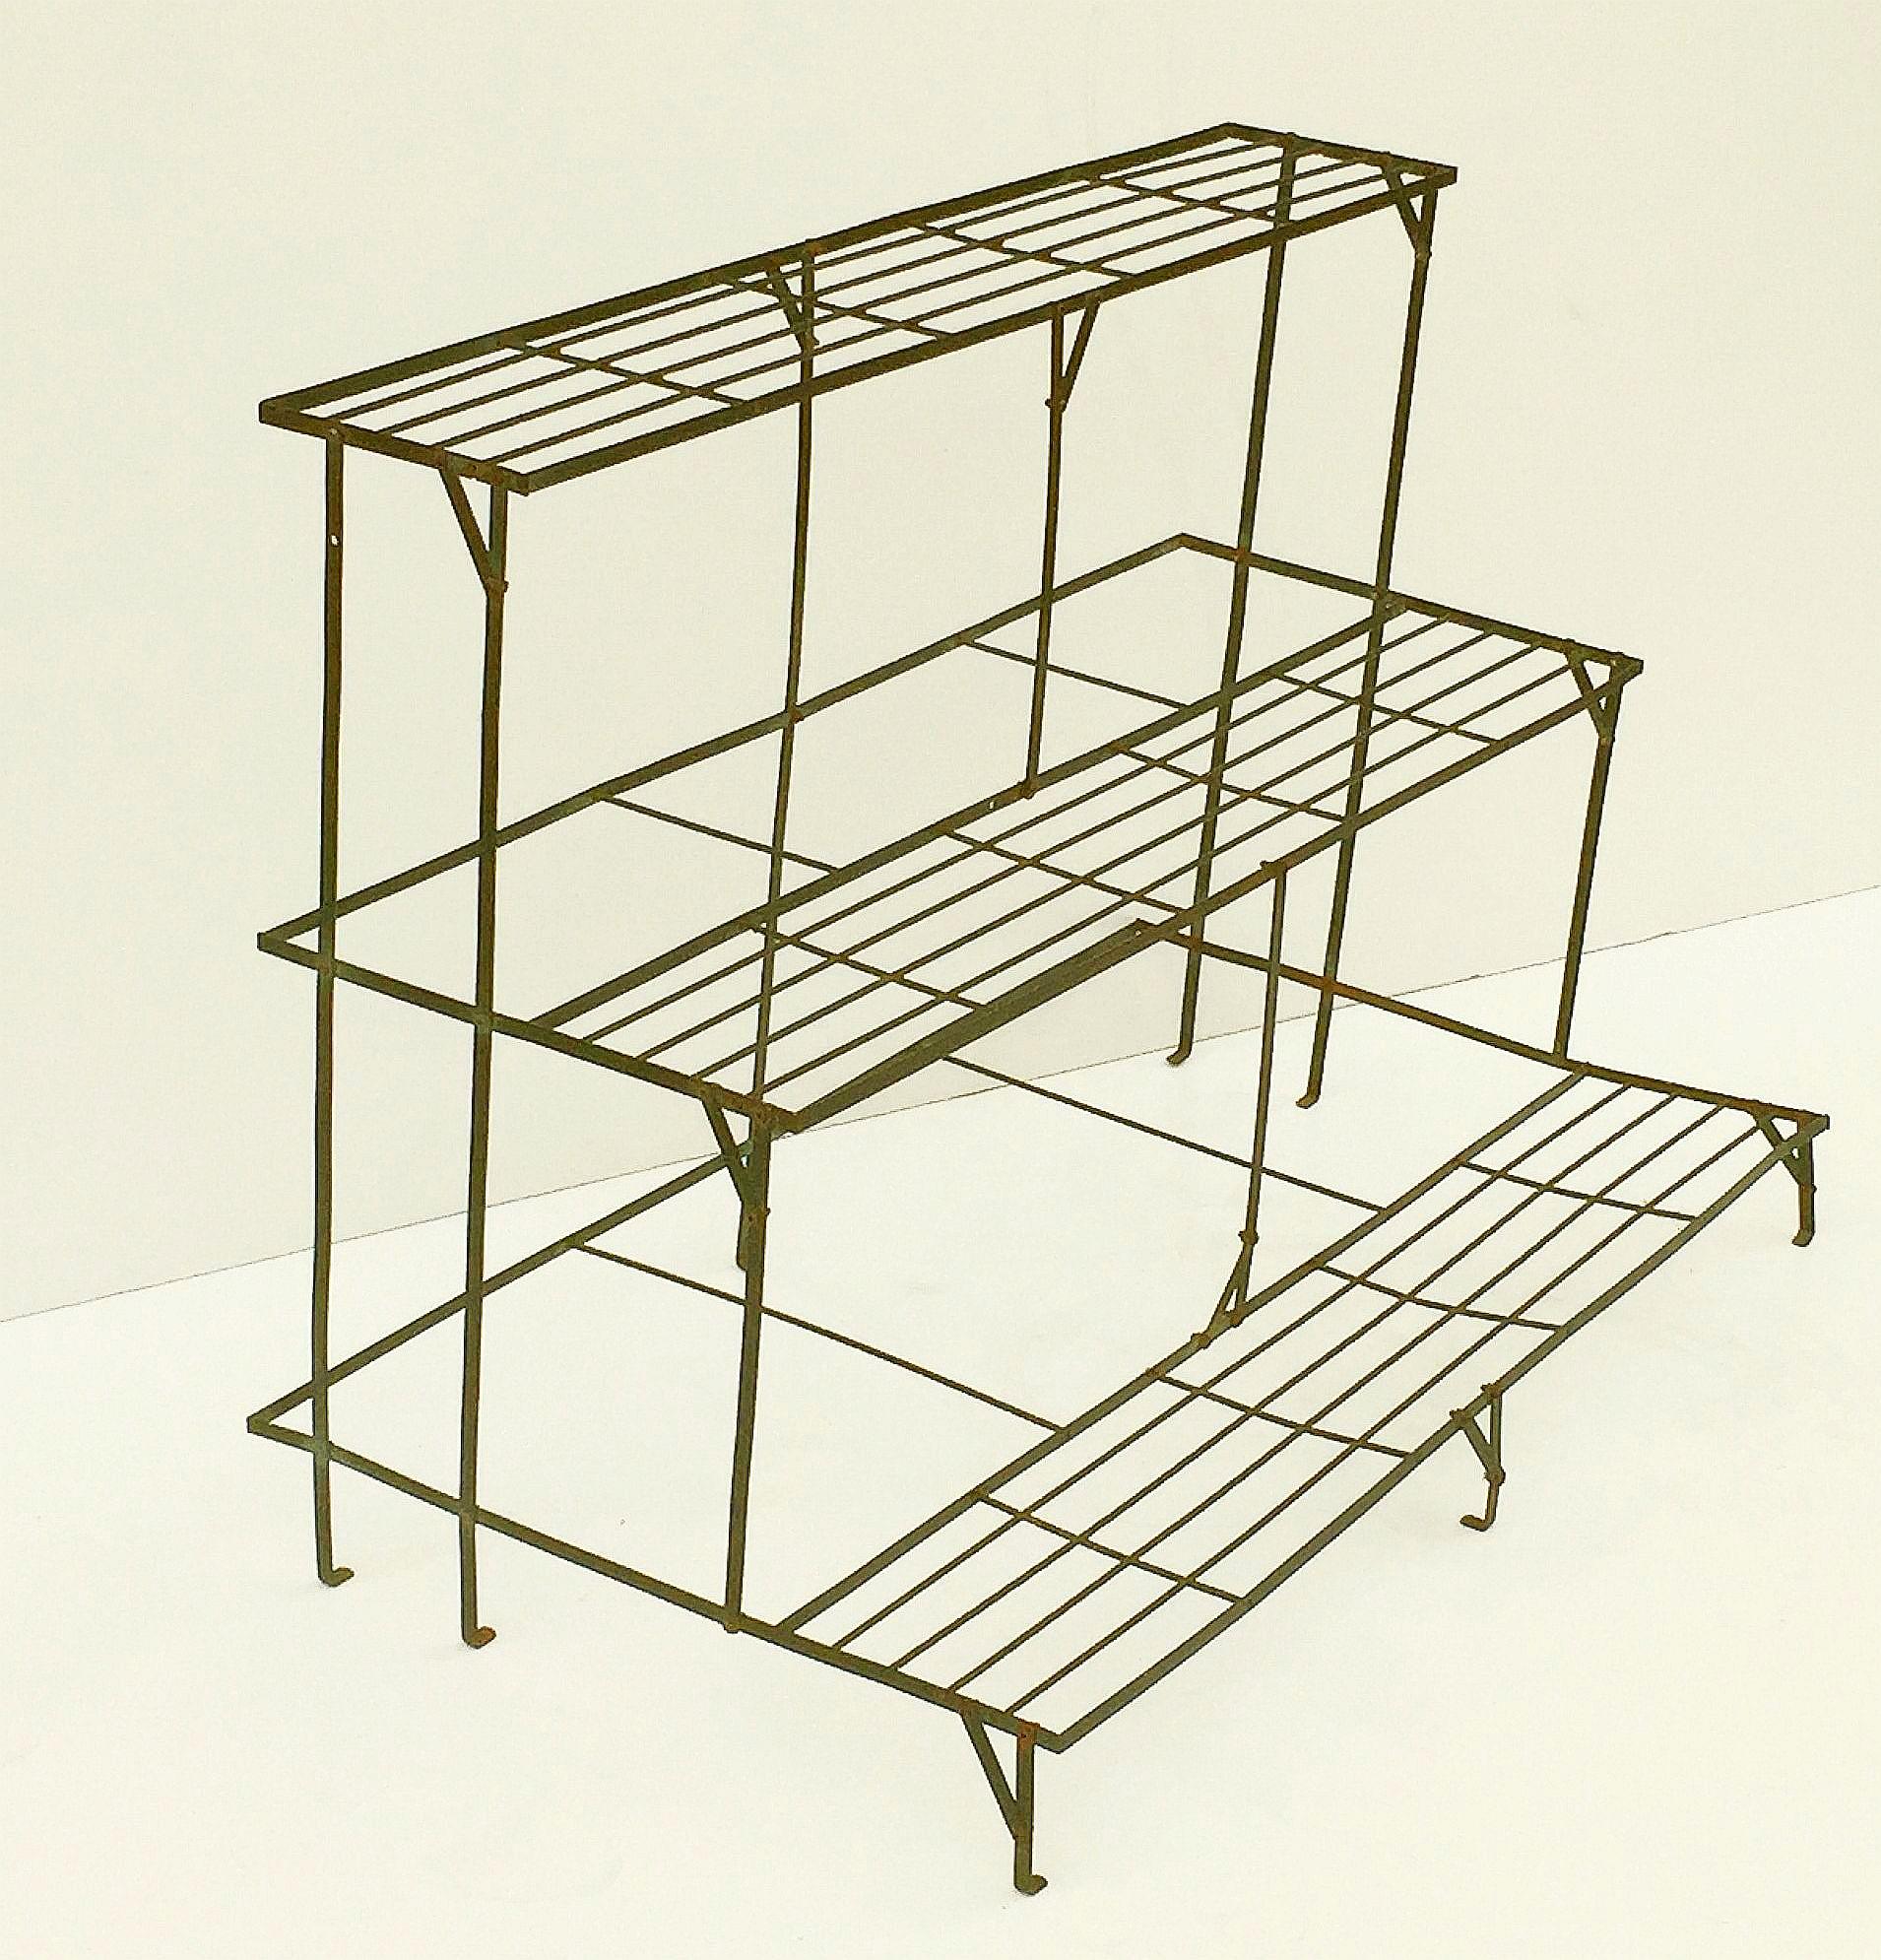 20th Century English Three-Tiered Rectangular Plant Stand of Painted Steel for the Garden